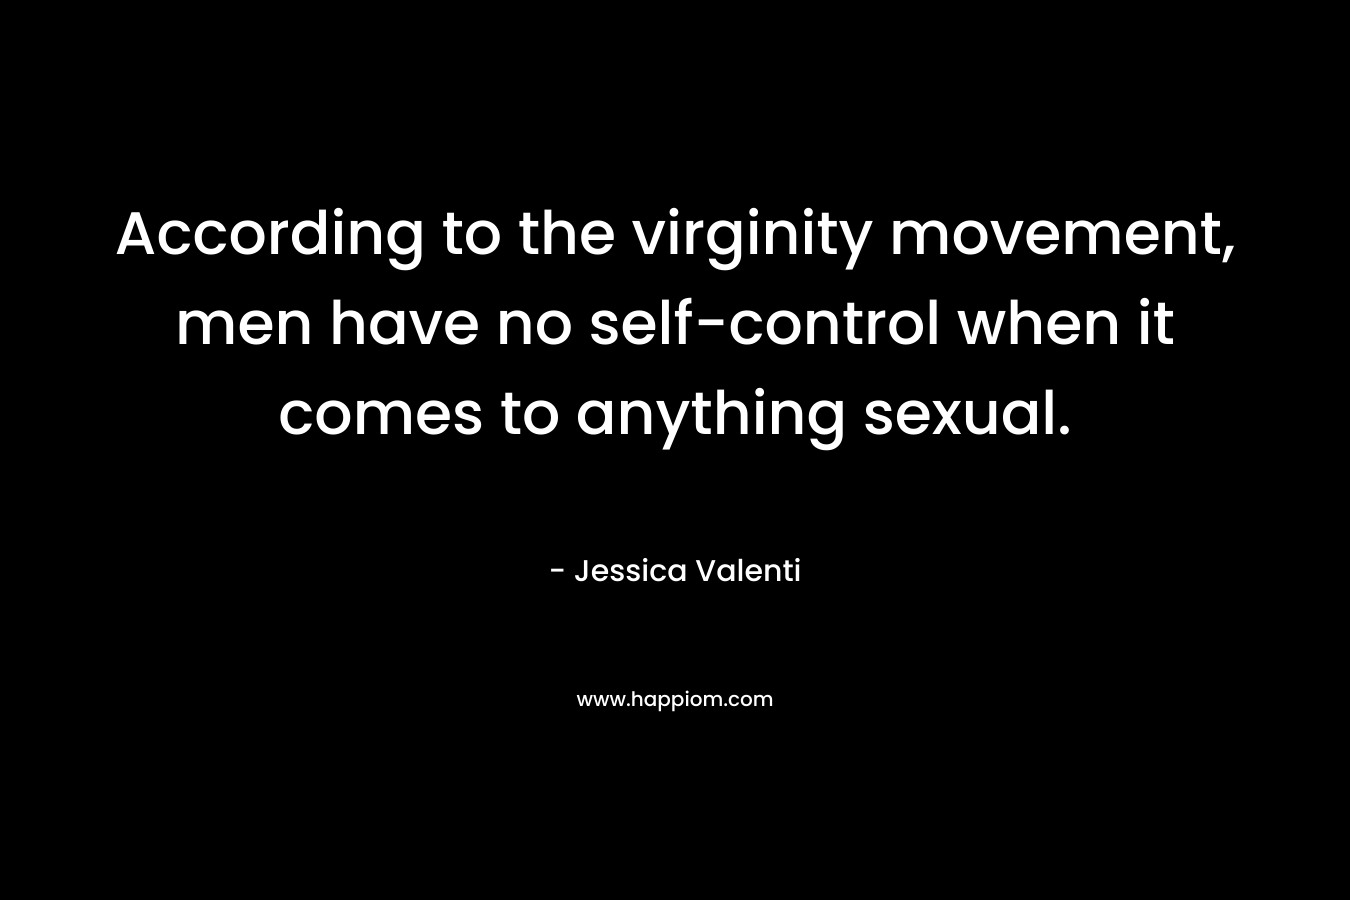 According to the virginity movement, men have no self-control when it comes to anything sexual.